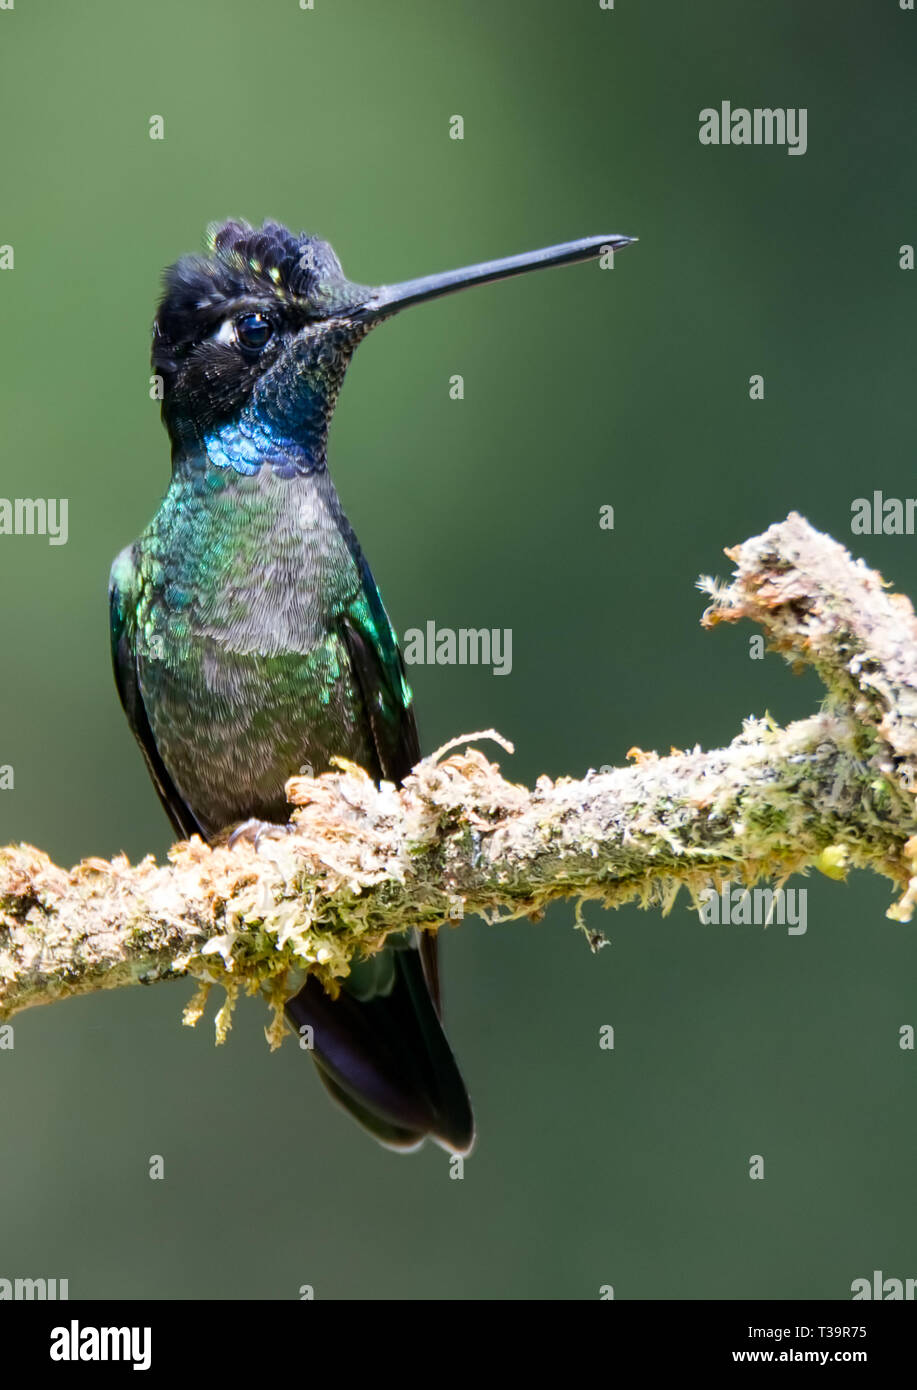 Sitting up straight this skinny creature is a Talamanca Hummingbird with a small patch of blue as a neck collar Stock Photo